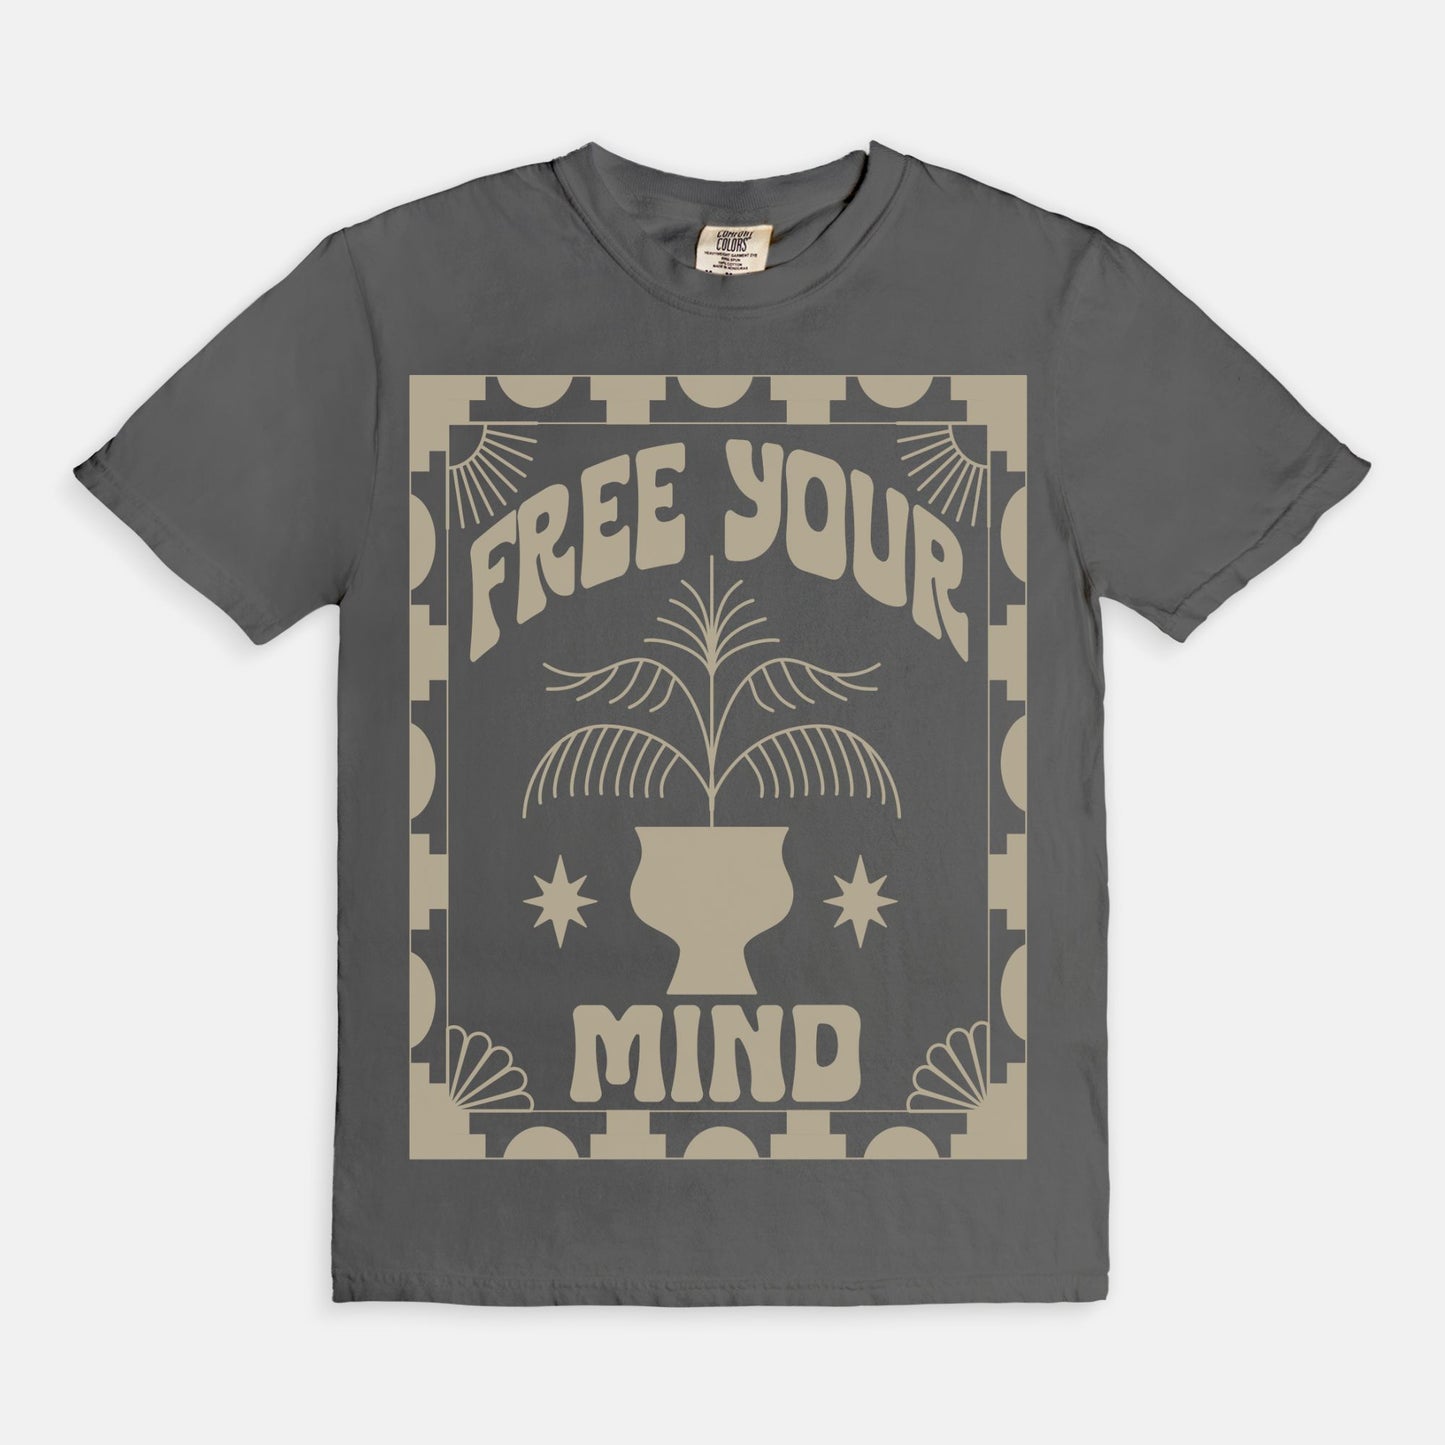 Free Your Mind Tee